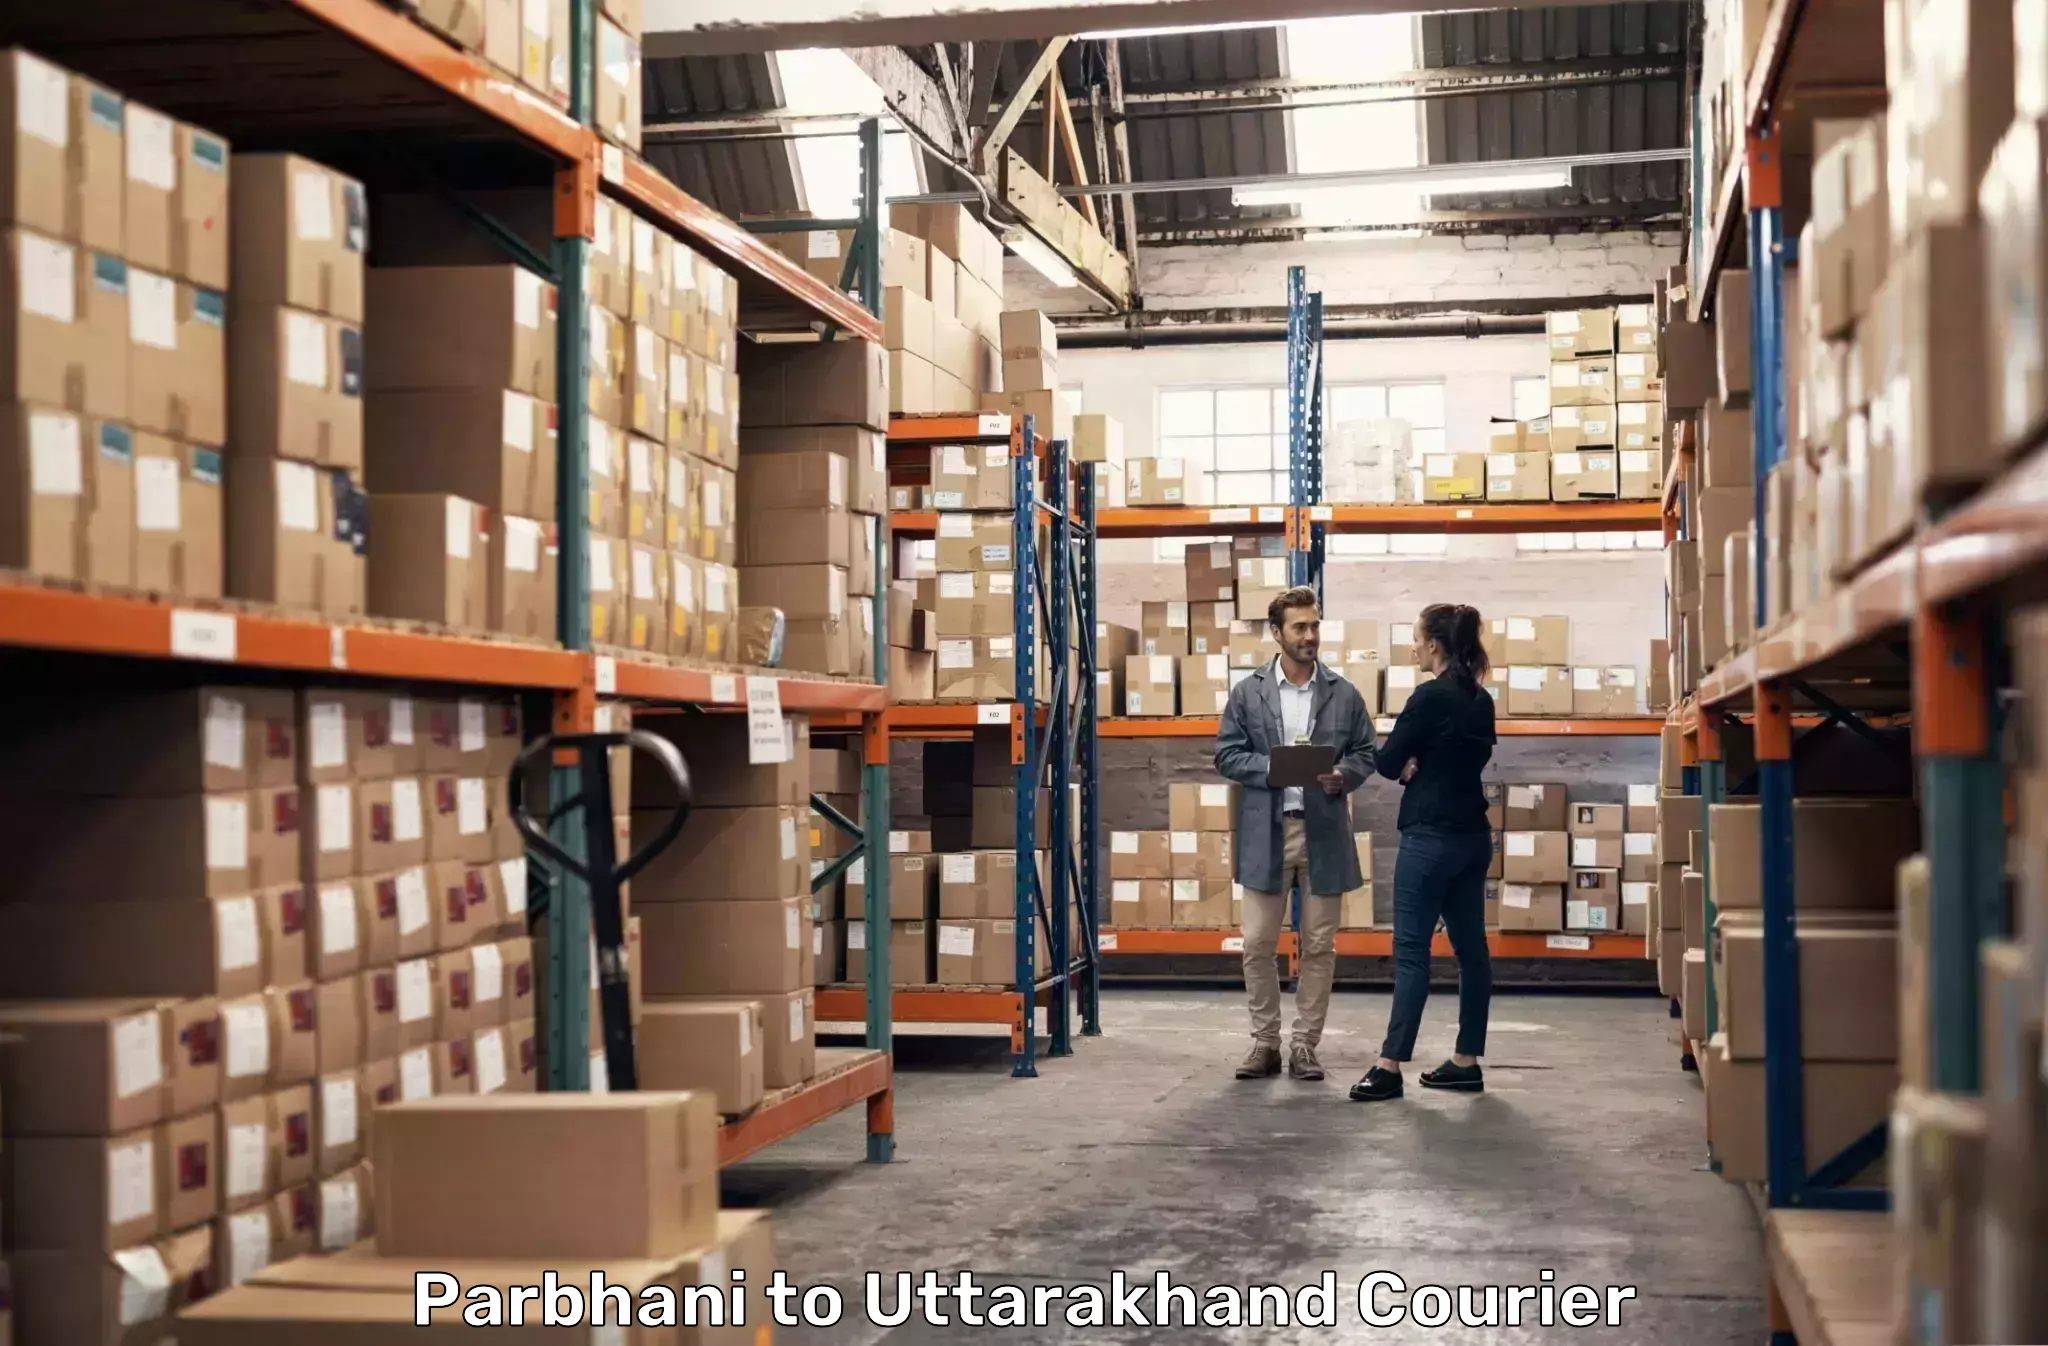 Local delivery service Parbhani to Uttarakhand